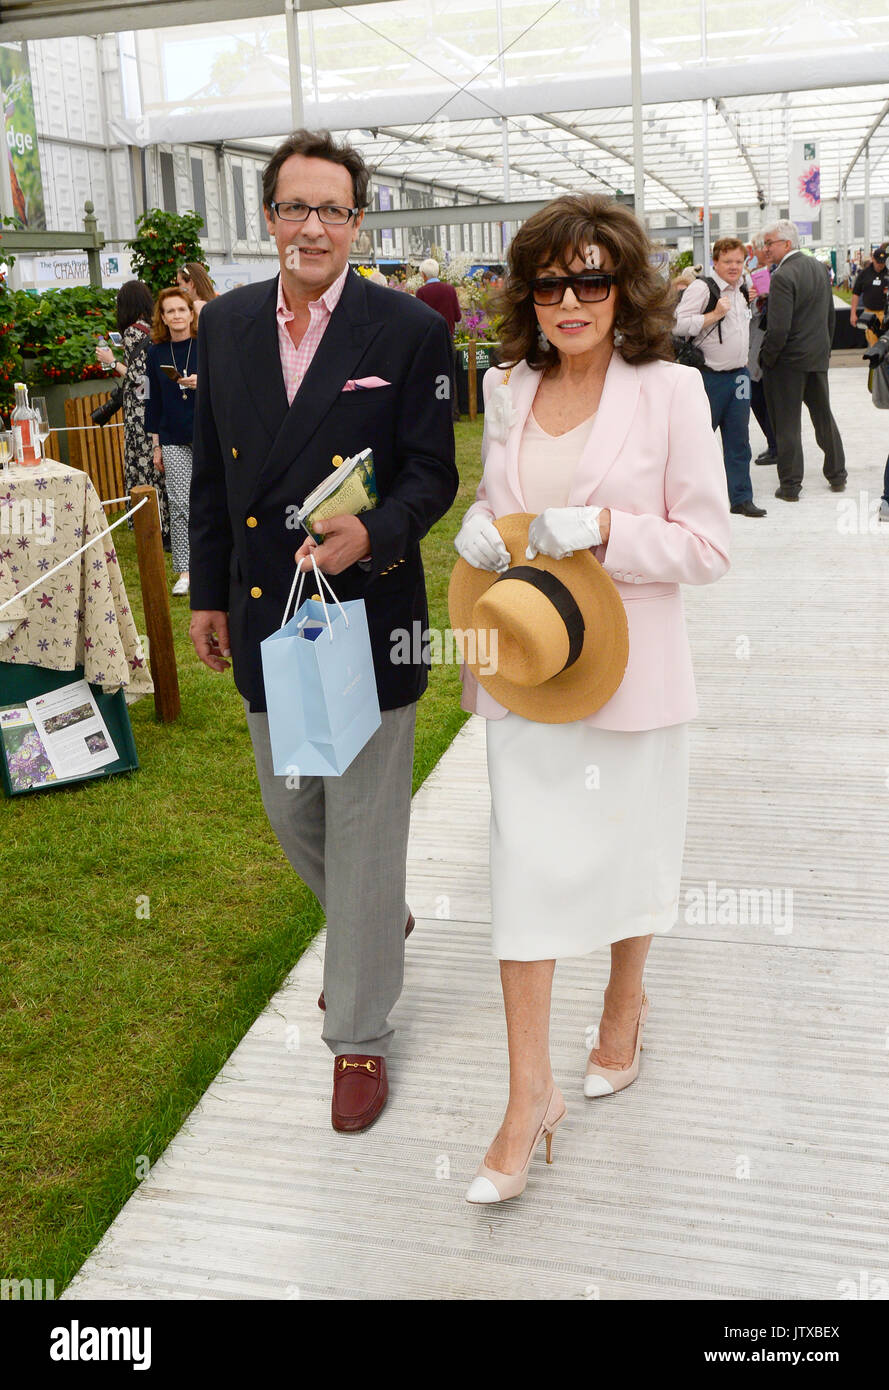 Actress Joan Collins and her husband Percy Gibson visit the Royal Horticultural Societies Chelsea Flower Show in London. Stock Photo